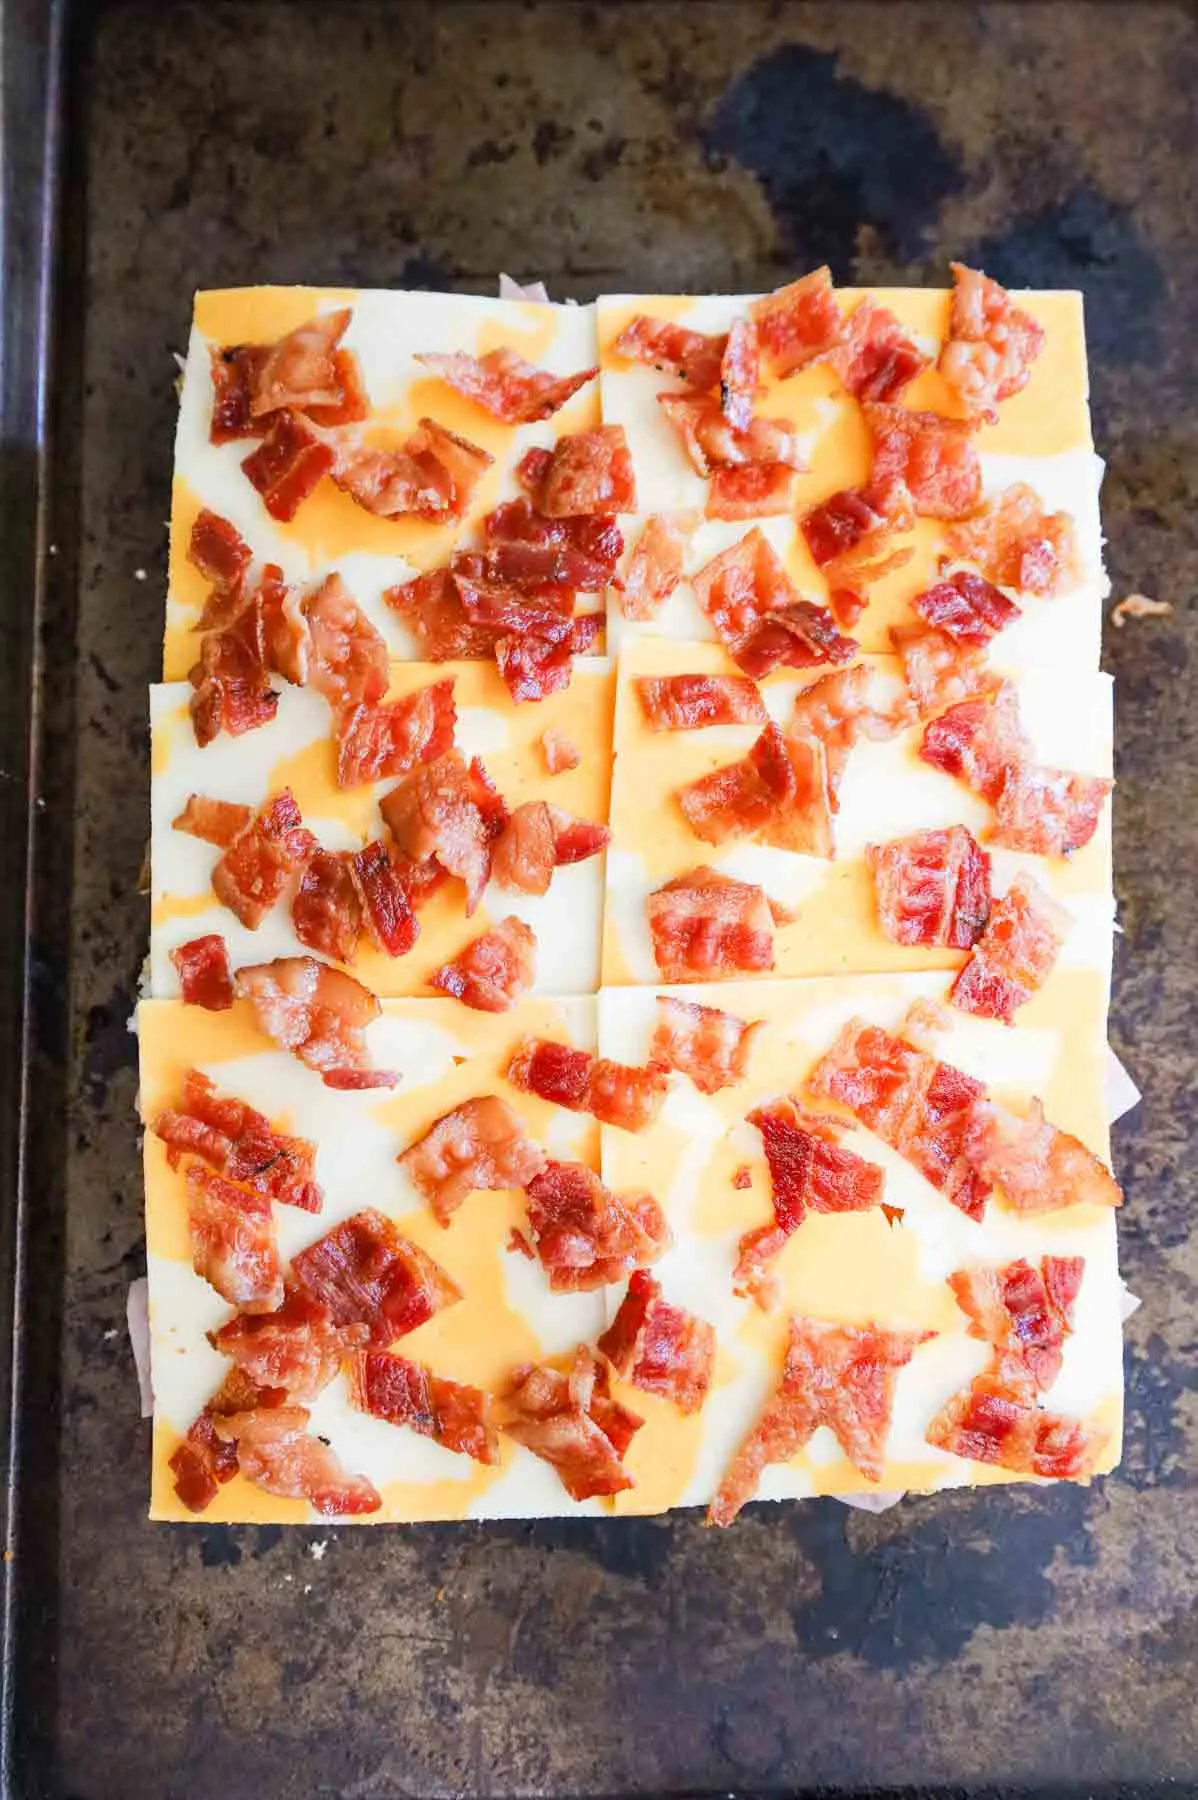 chopped bacon on top of cheddar cheese slices